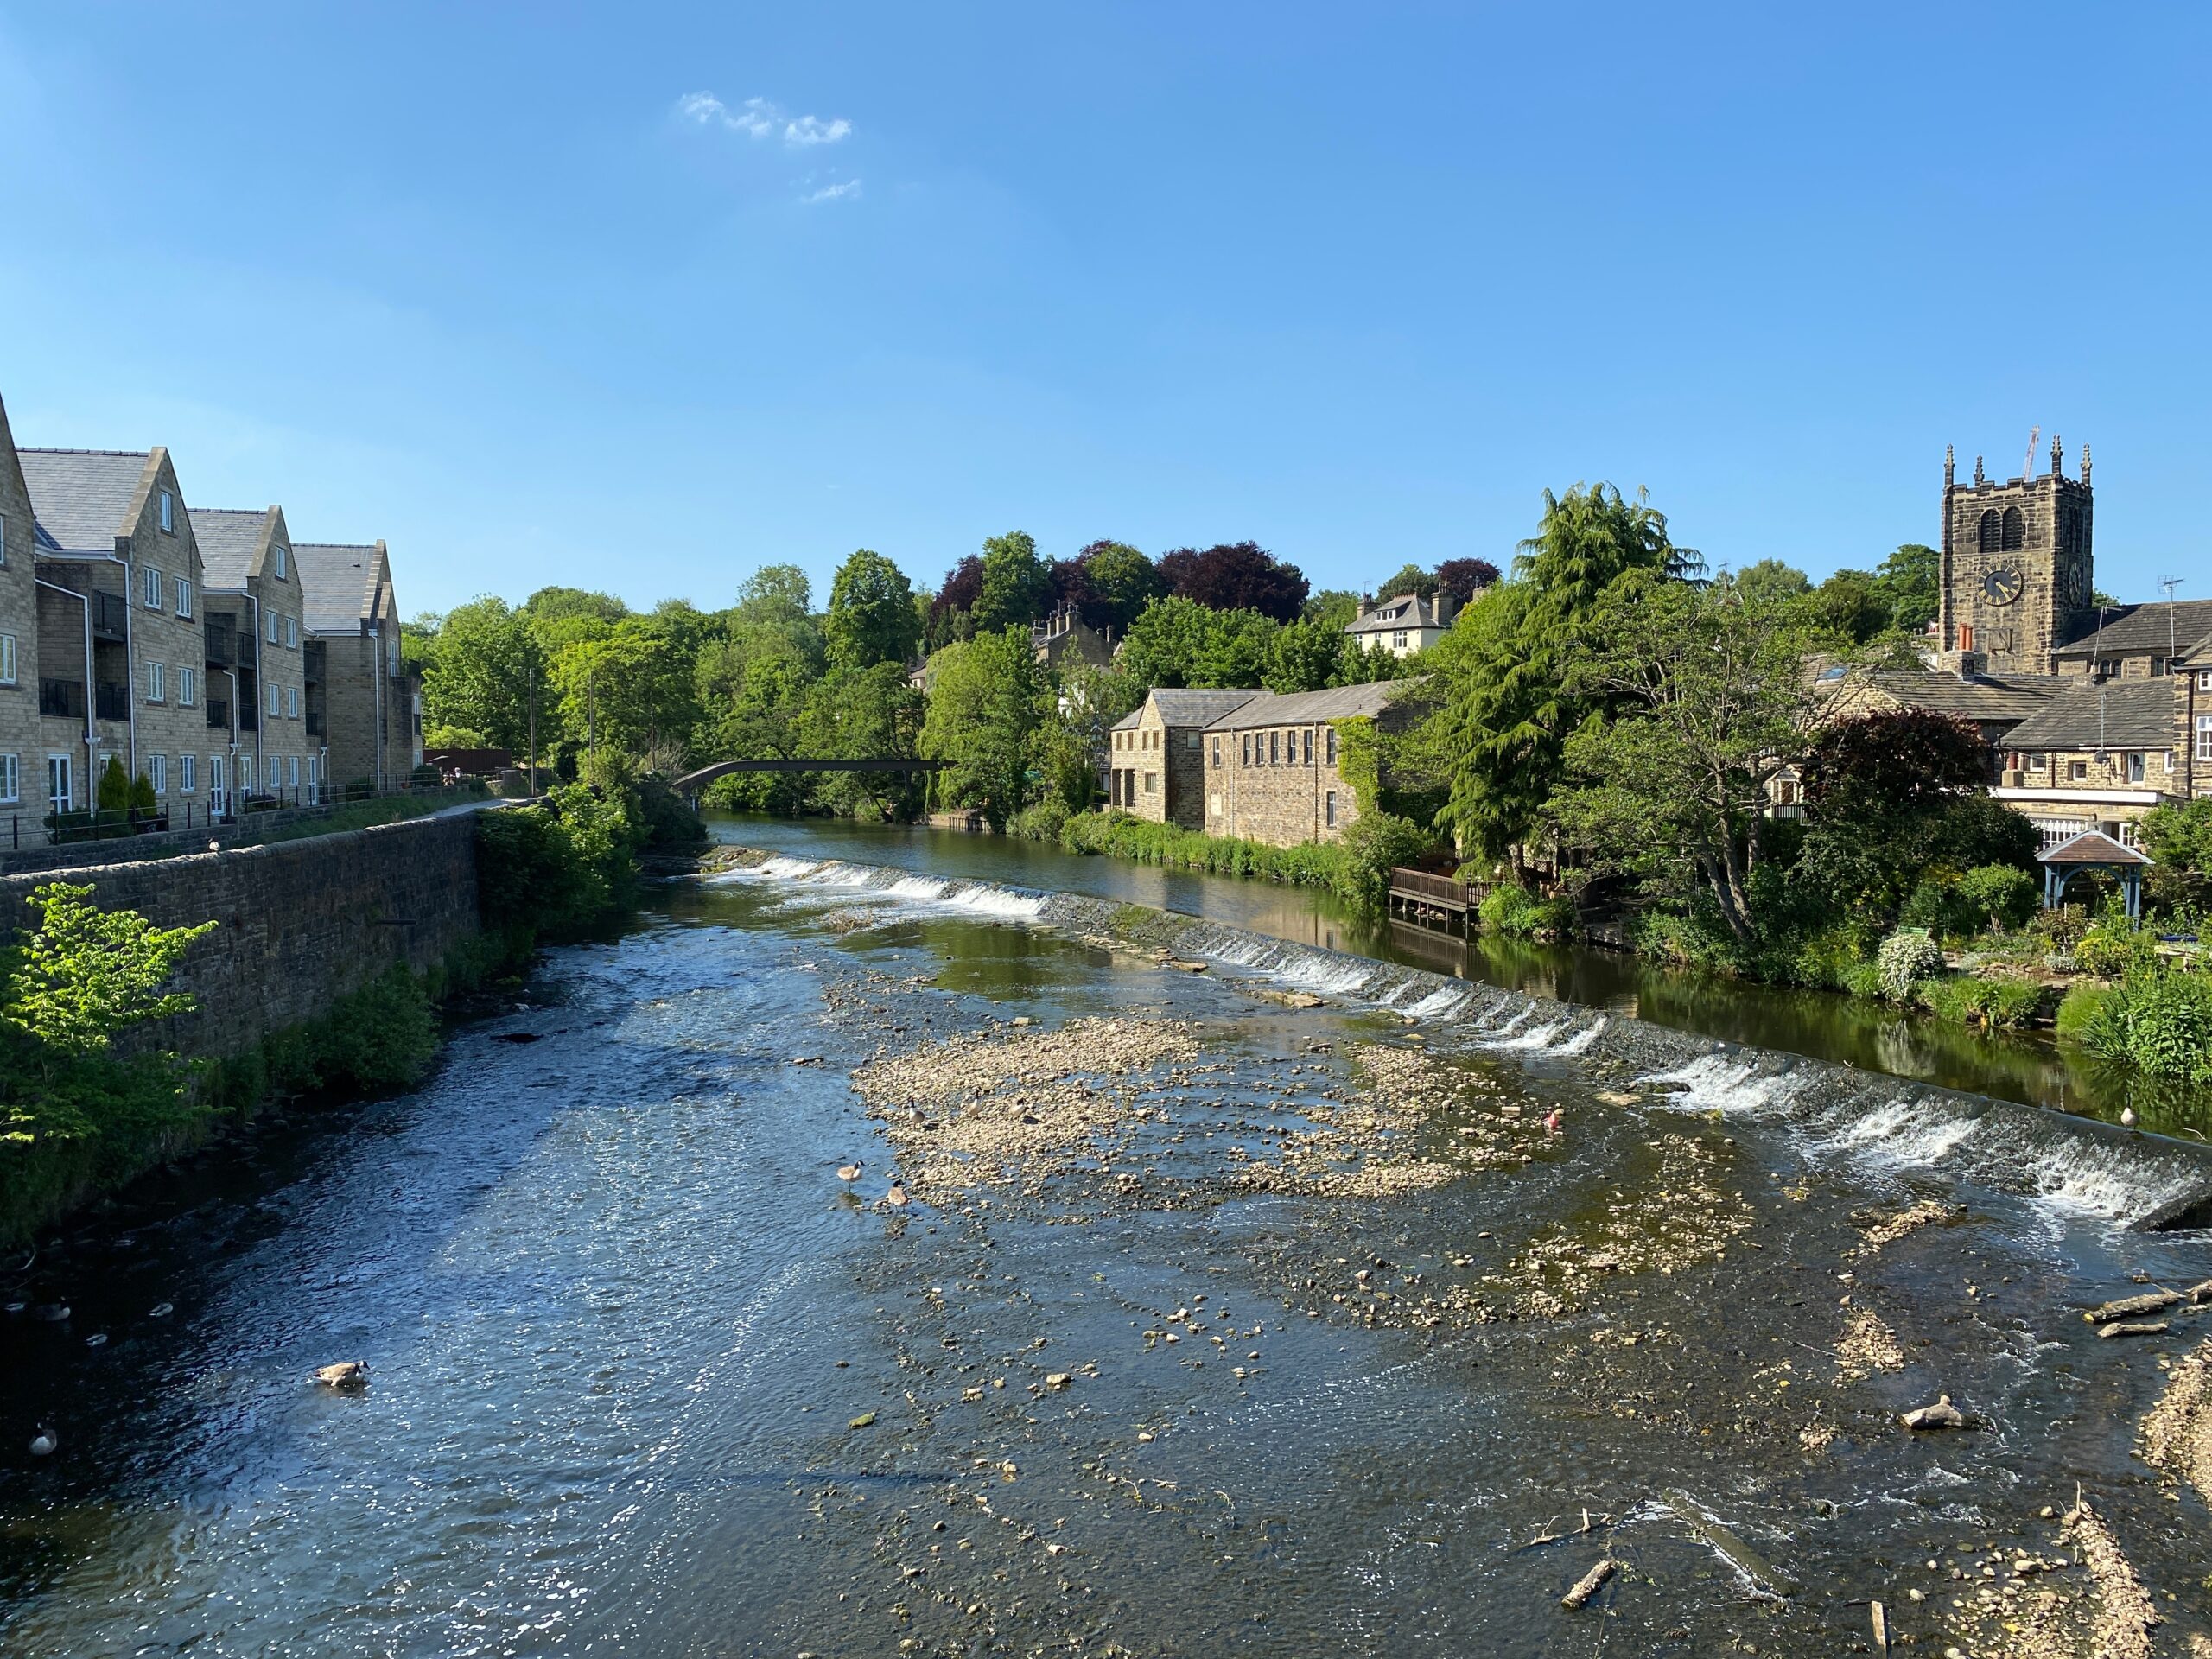 River Aire as it flows through Bingley, with houses, trees, and